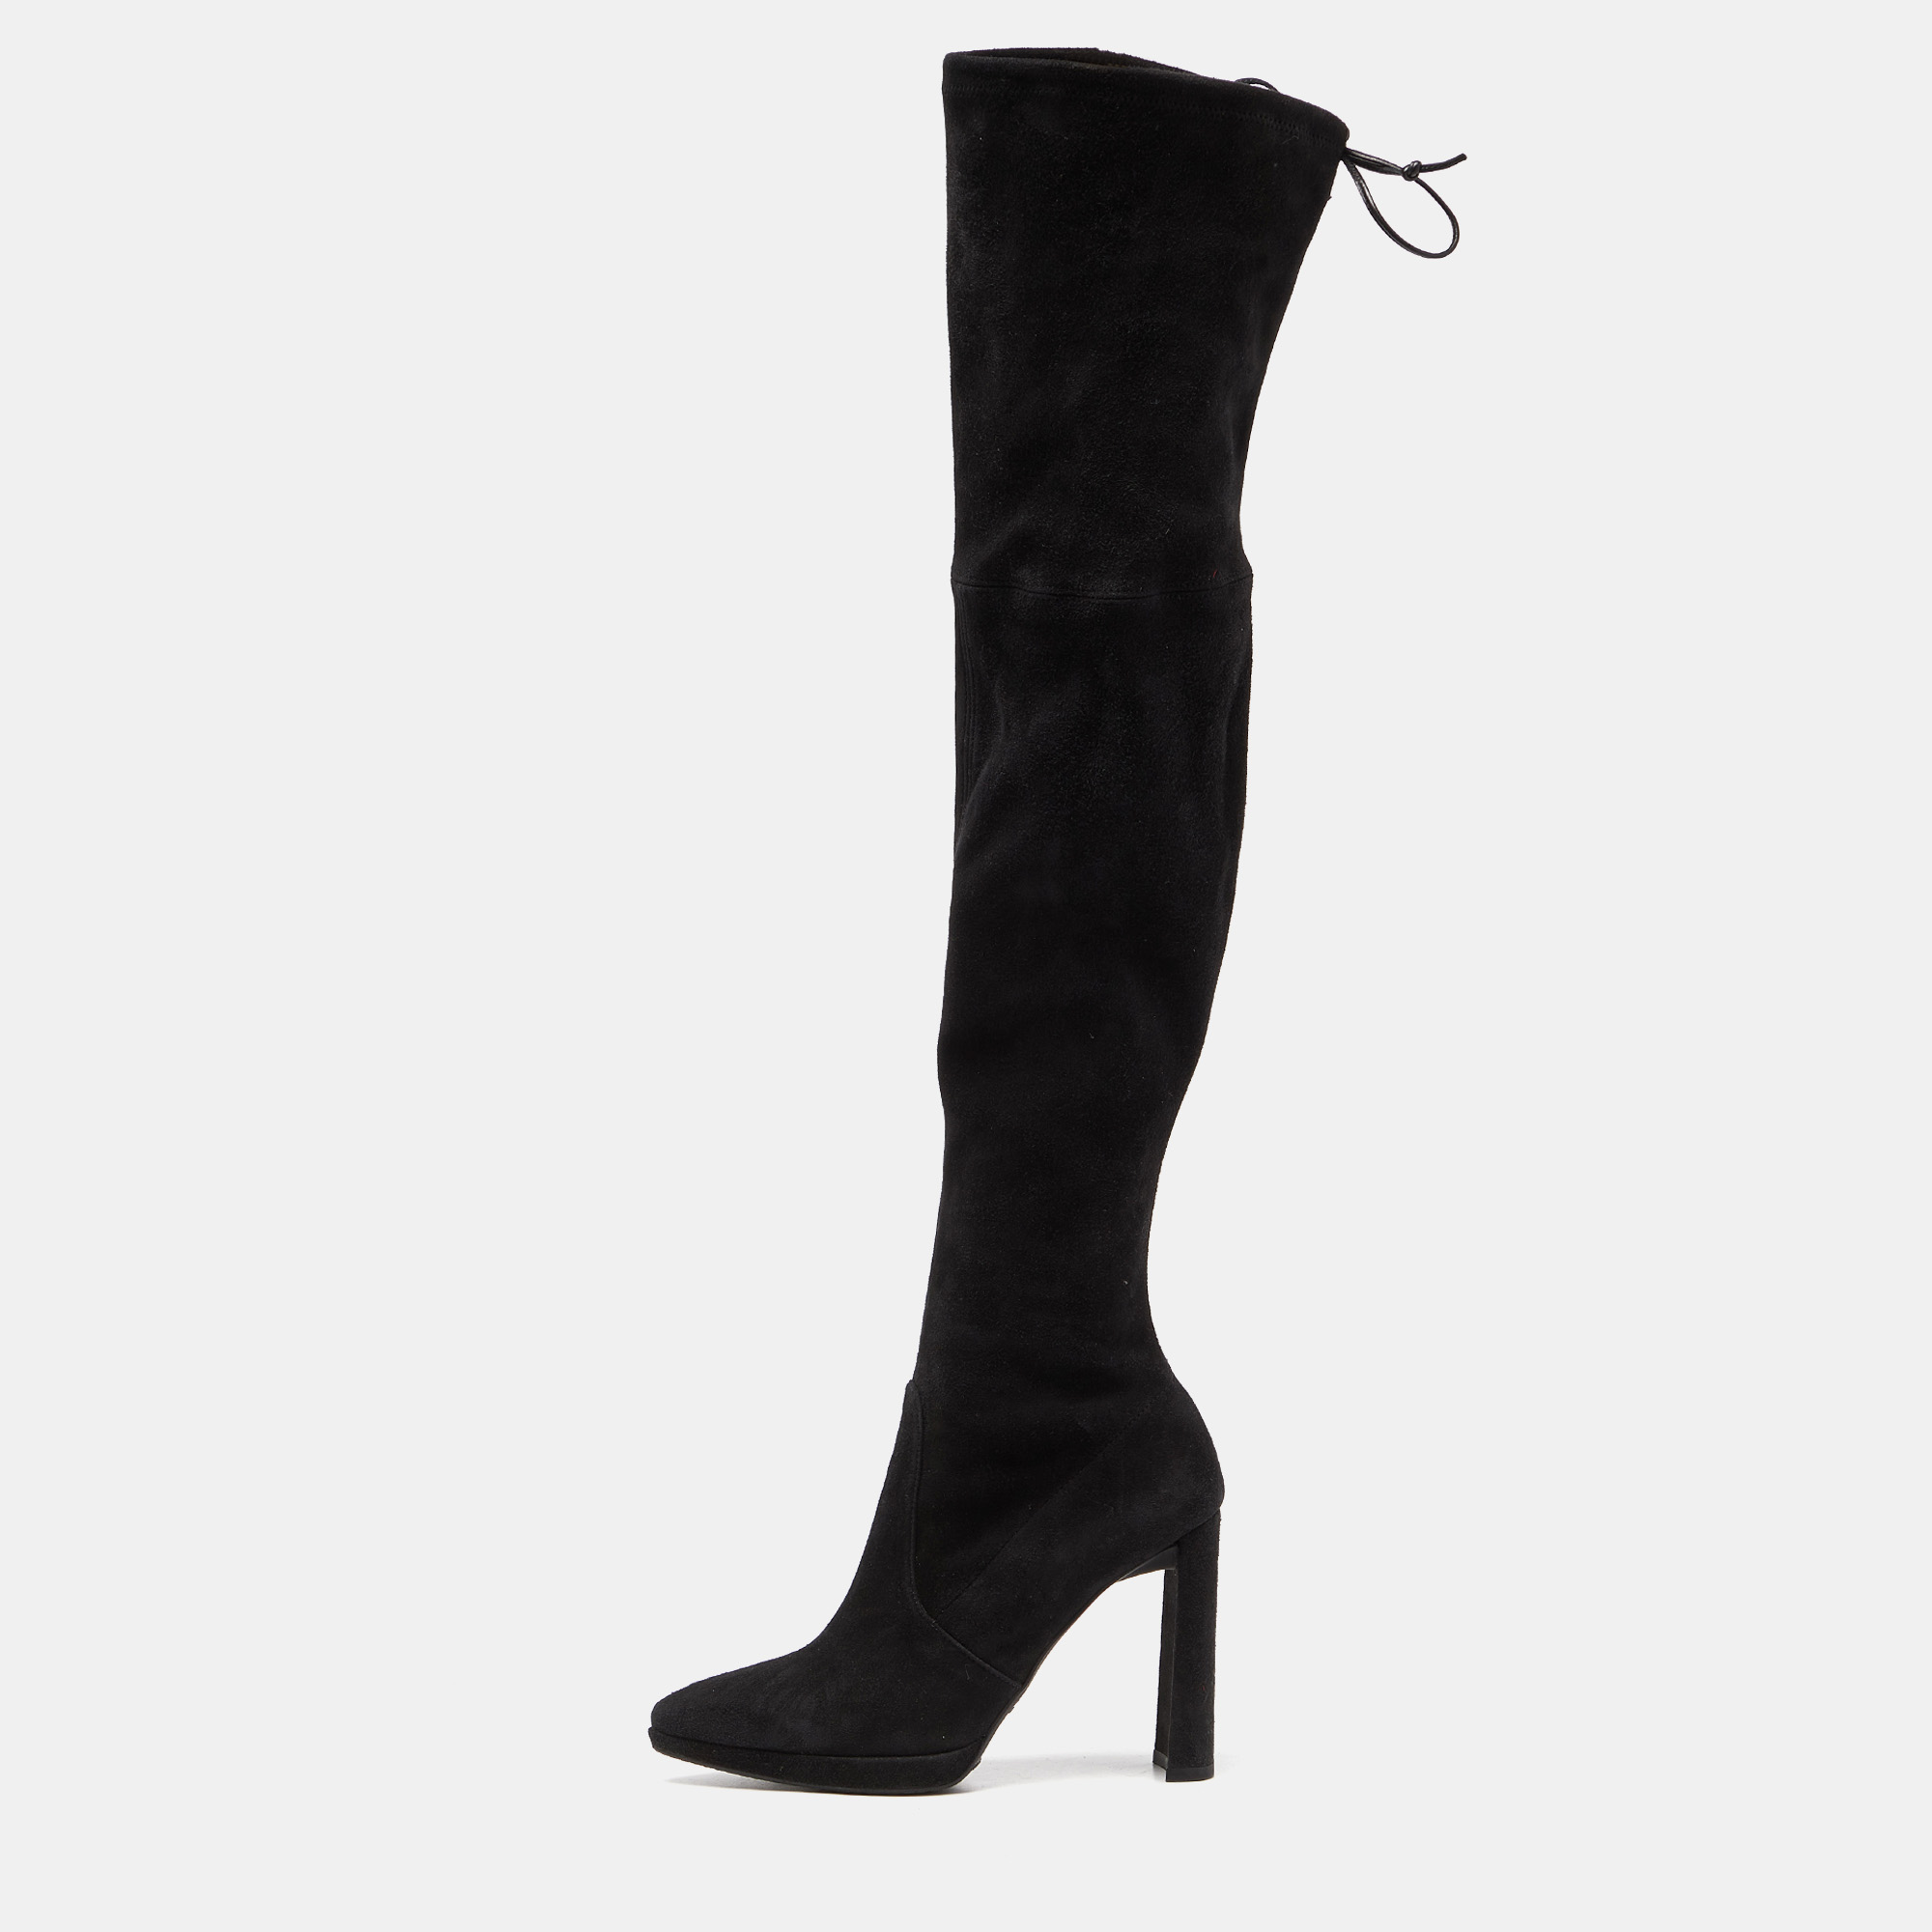 Pre-owned Stuart Weitzman Black Suede Over The Knee Length Boots Size 37